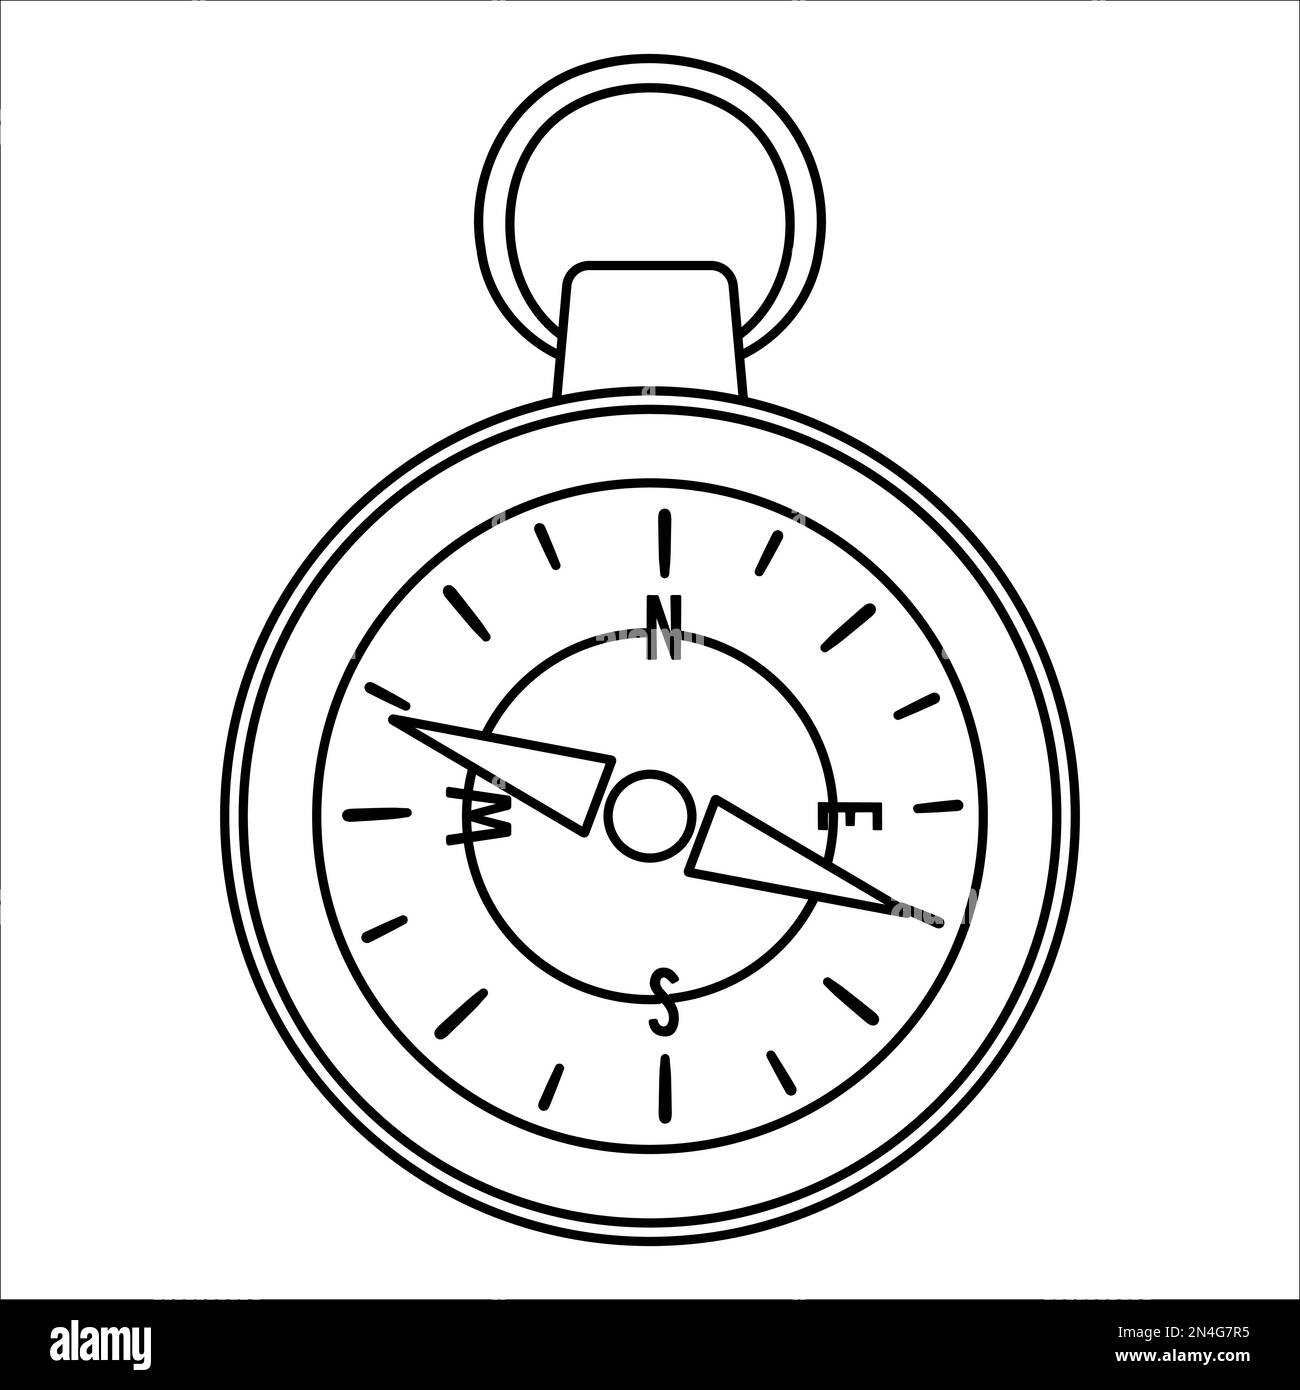 Vector black and white compass icon isolated on white background. Camping or hiking equipment outline illustration for kids. Line art orienteering dev Stock Vector